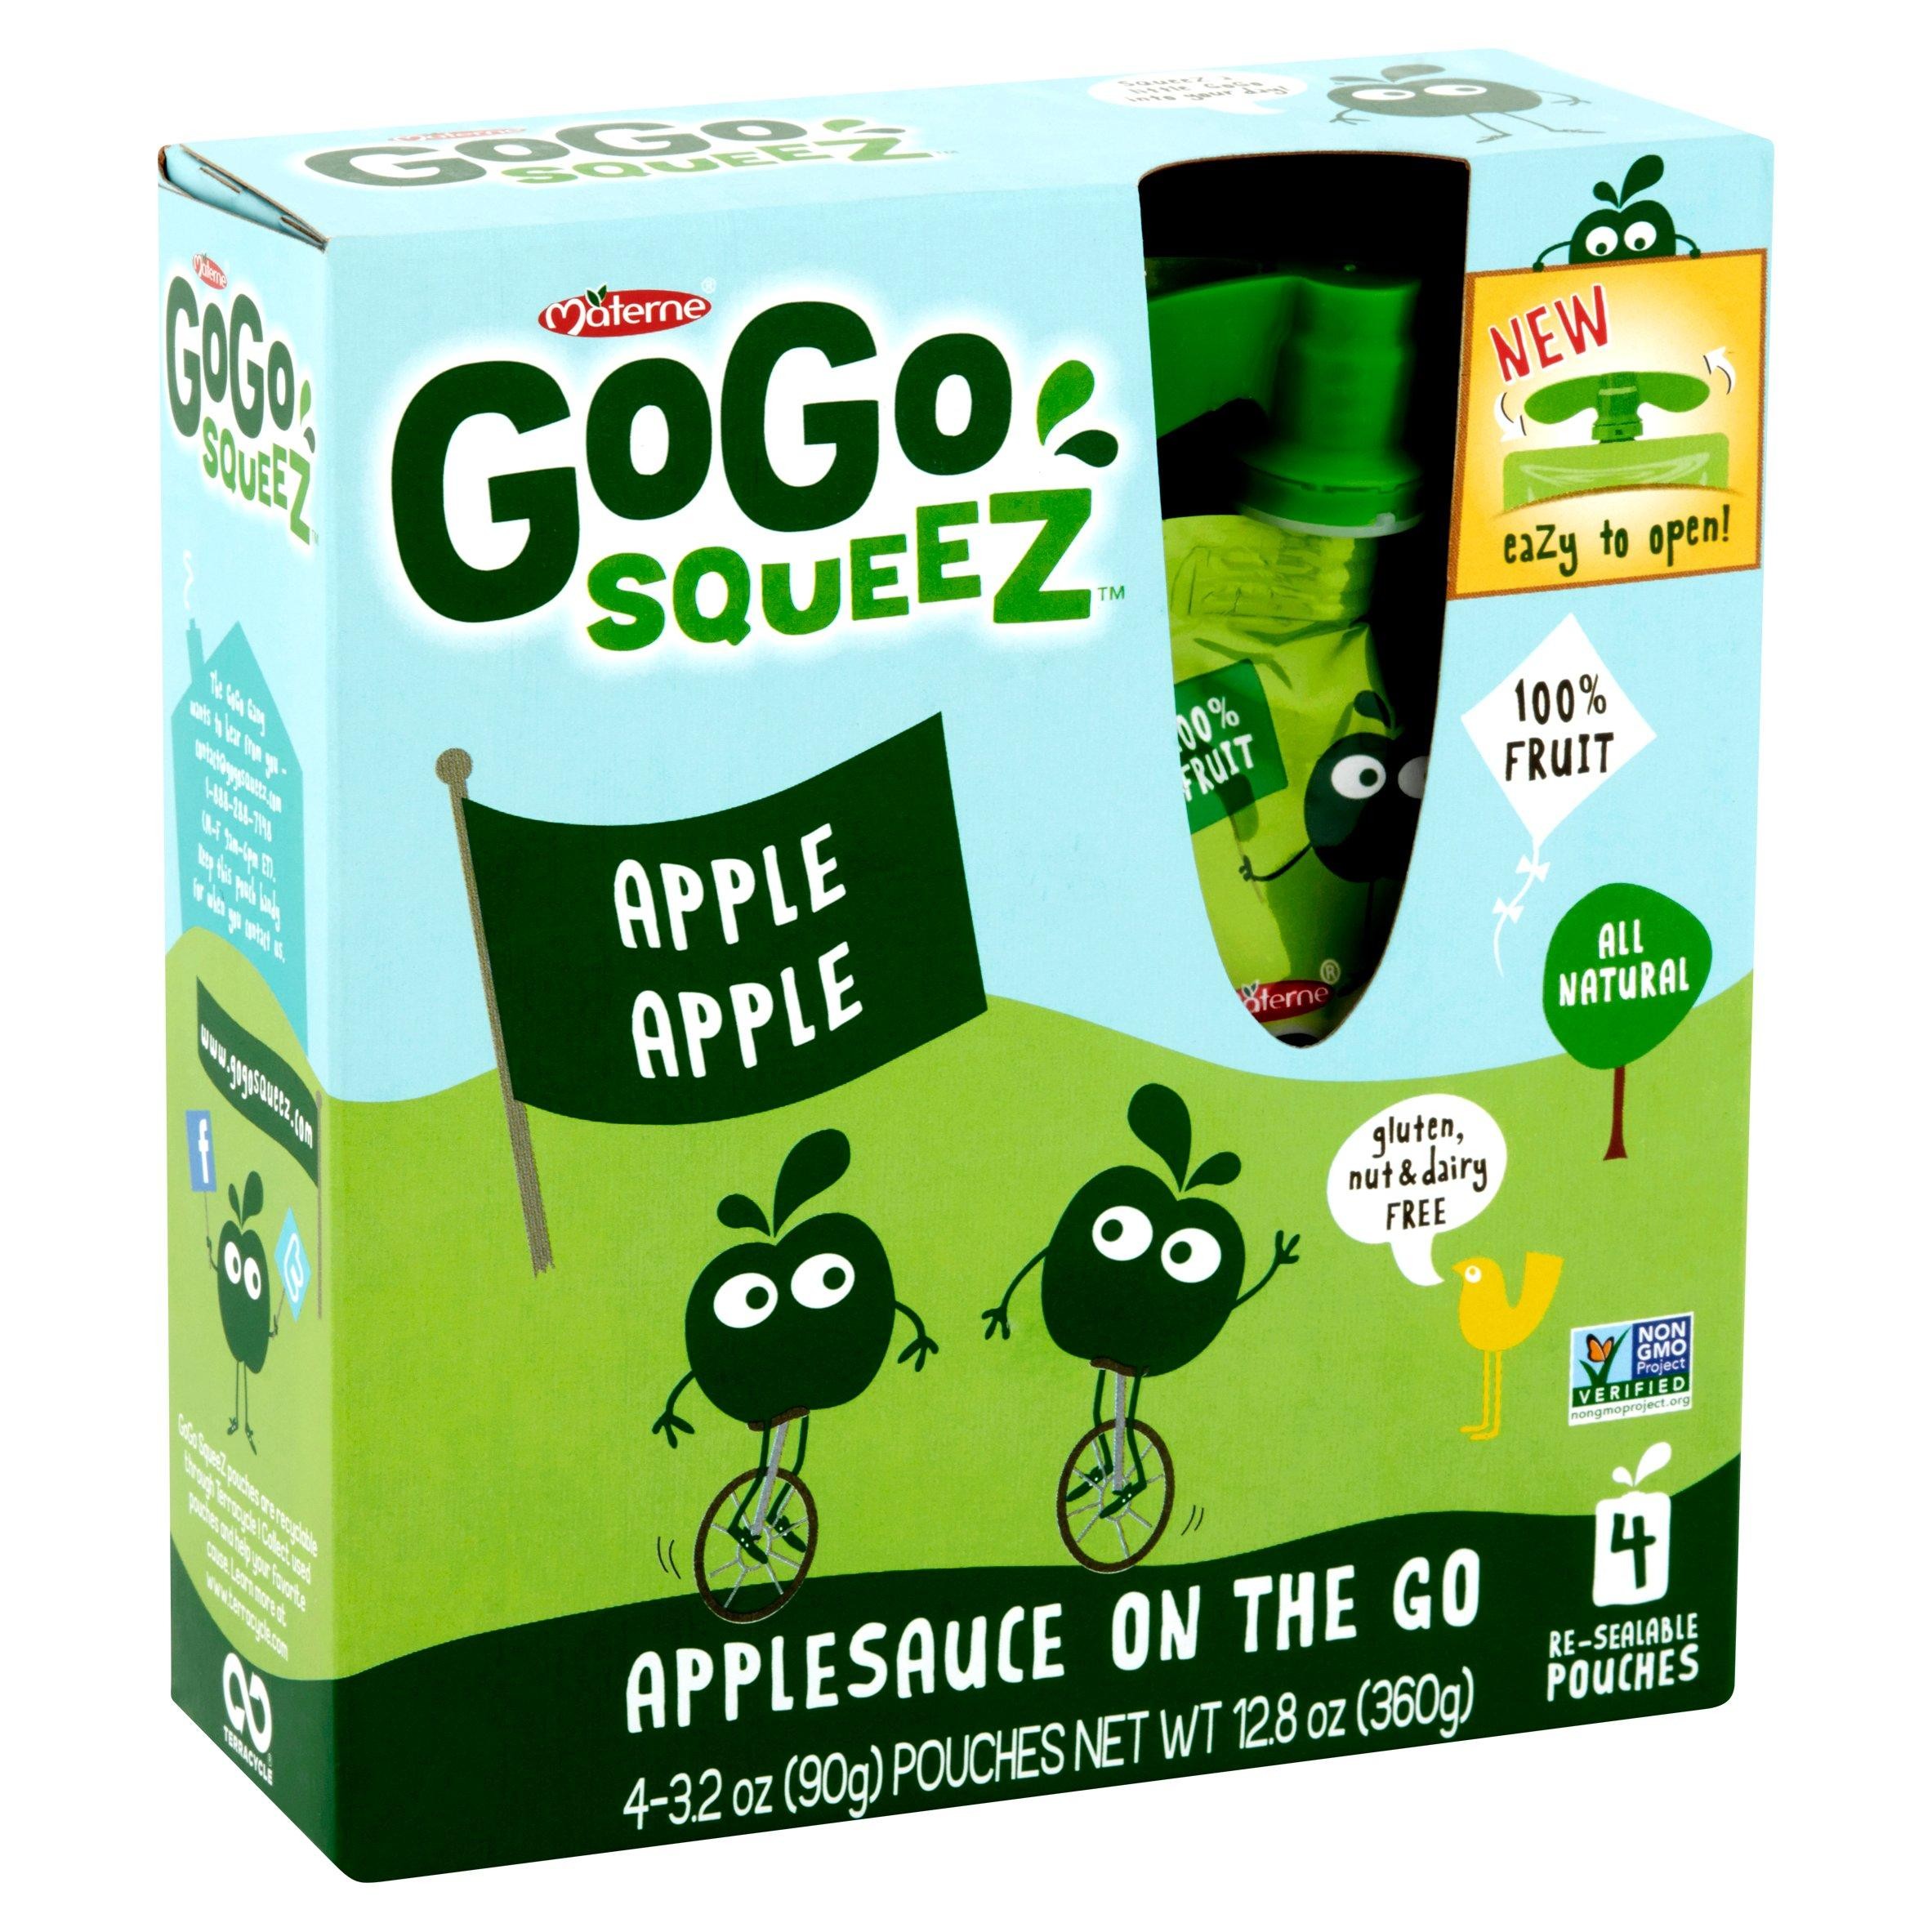 Materne GoGo Squeeze Apple Sauce Fruit On The Go 4-3.2oz